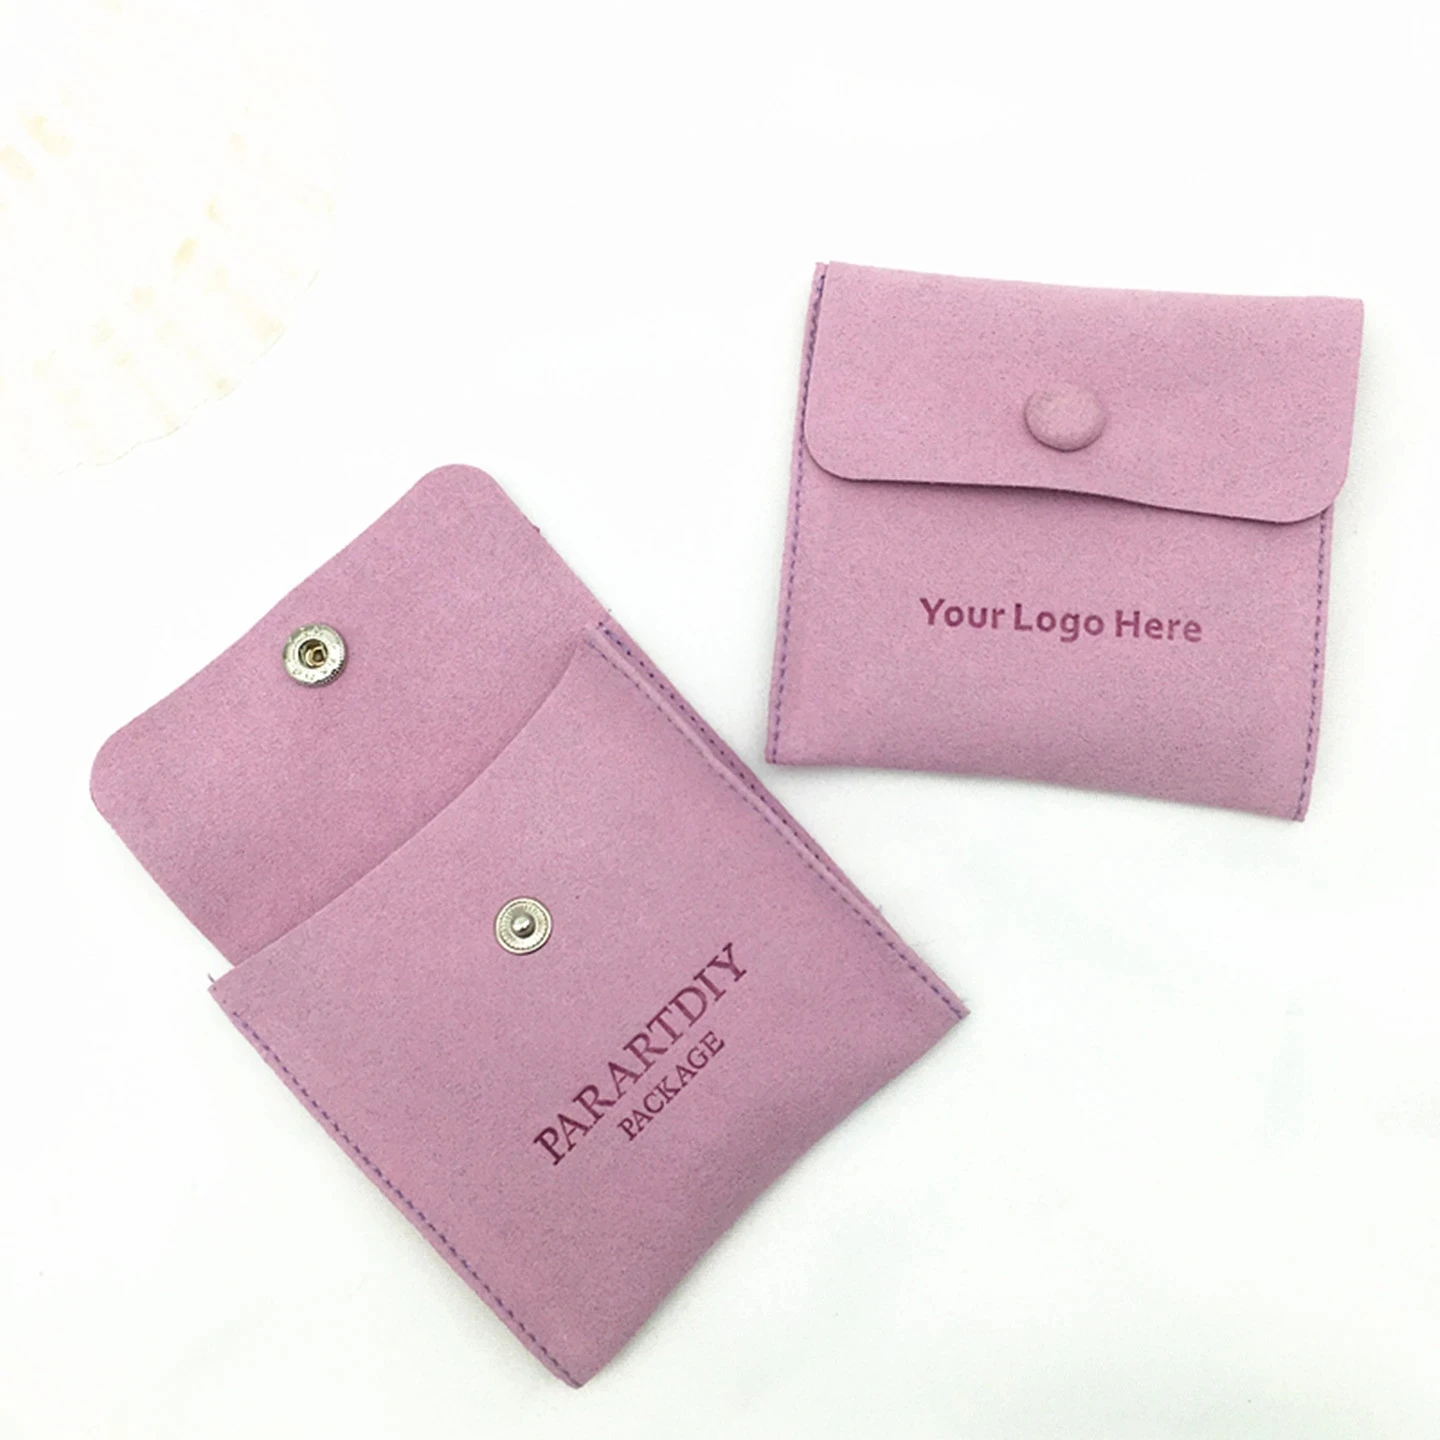 50 pieces of purple jewelry bags with buttons wholesale custom logo jewelry bags necklaces earrings brooch small bags